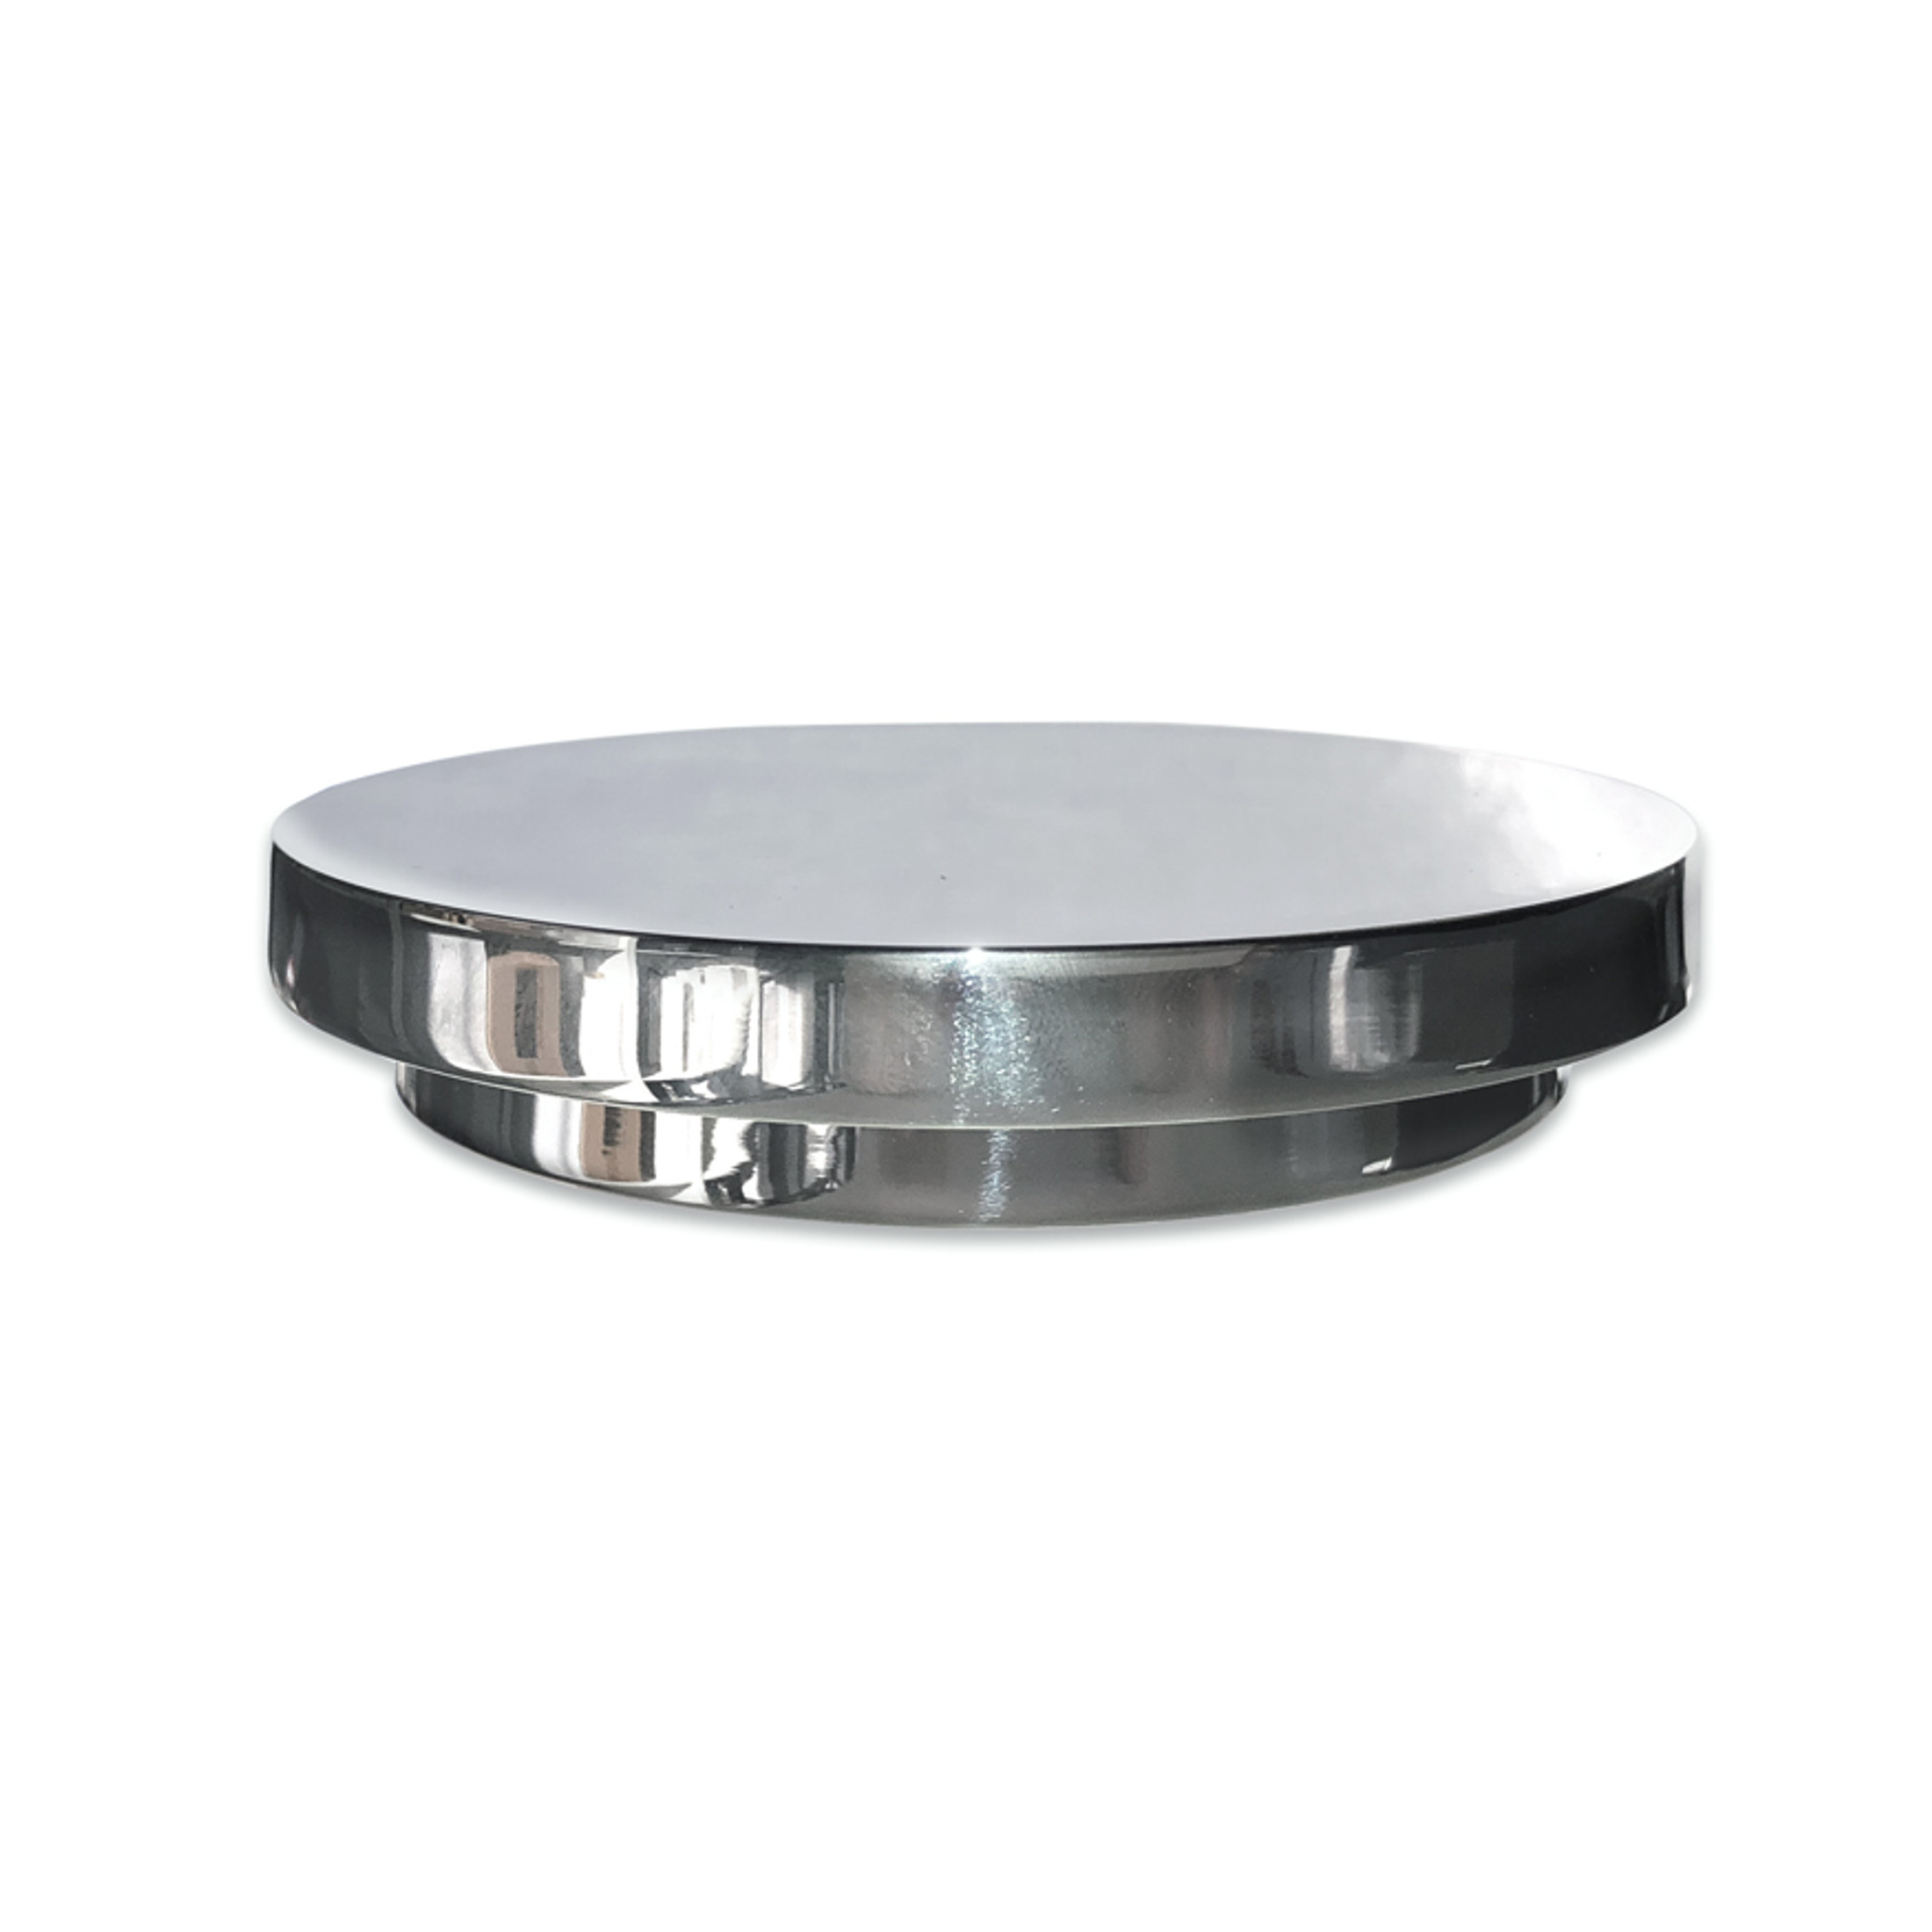 Drop-In Lid - Polished Chrome